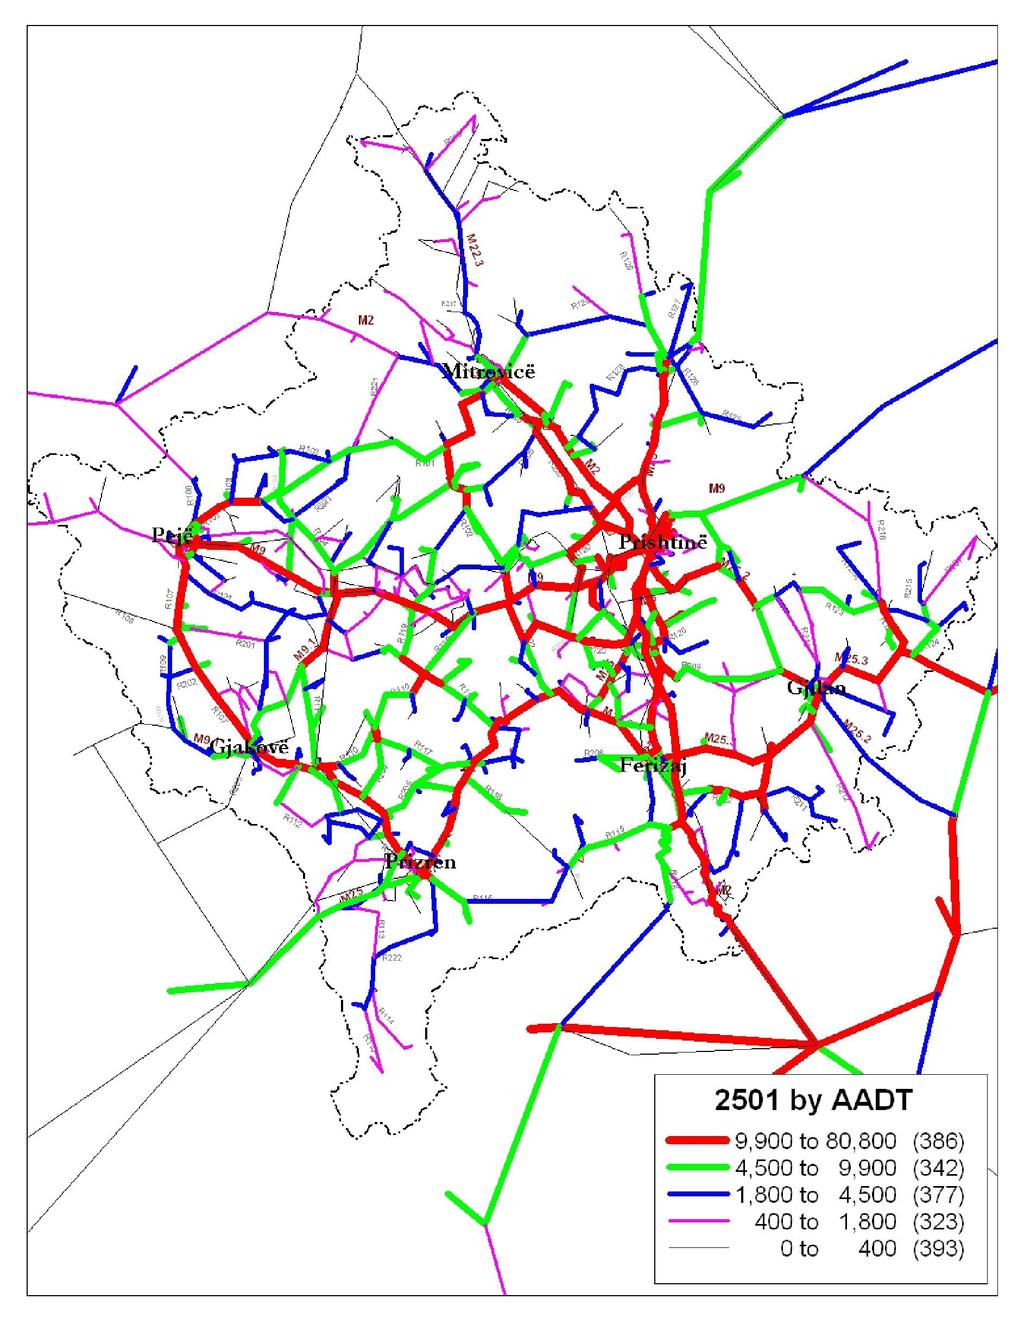 Capstone Project A 2009 traffic estimates study22 has developed traffic forecasts (2007 2025) for each of the Five Scenarios referred above, available to Ministry of Transportation and Communications.